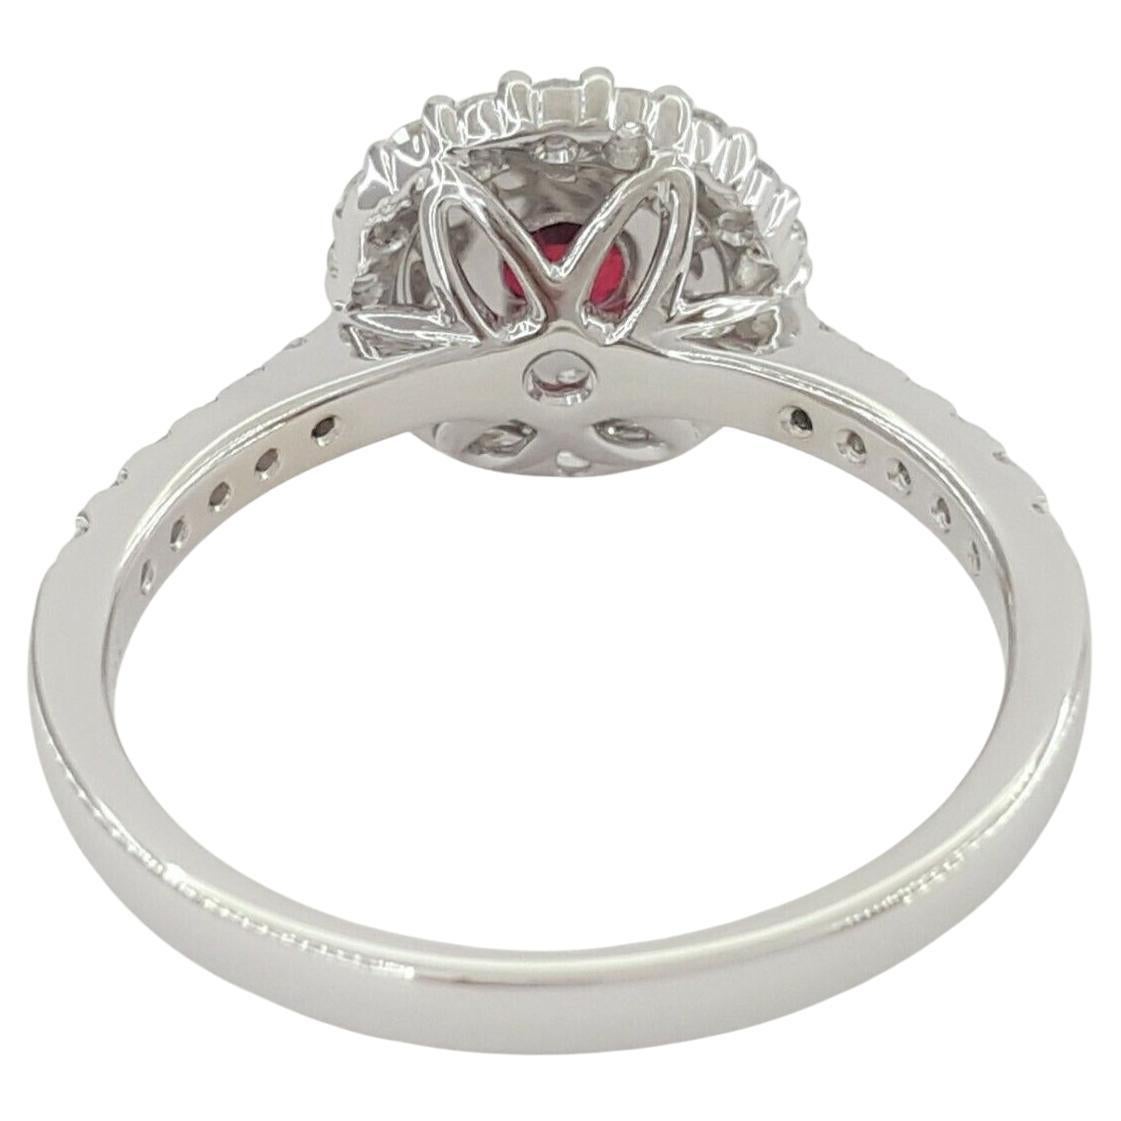 Capture the essence of timeless elegance with this stunning 18k White Gold Double Halo Ring, designed to mesmerize with its exquisite craftsmanship and captivating gemstones. At its heart lies a brilliant Natural Red Ruby, boasting a weight of 0.48